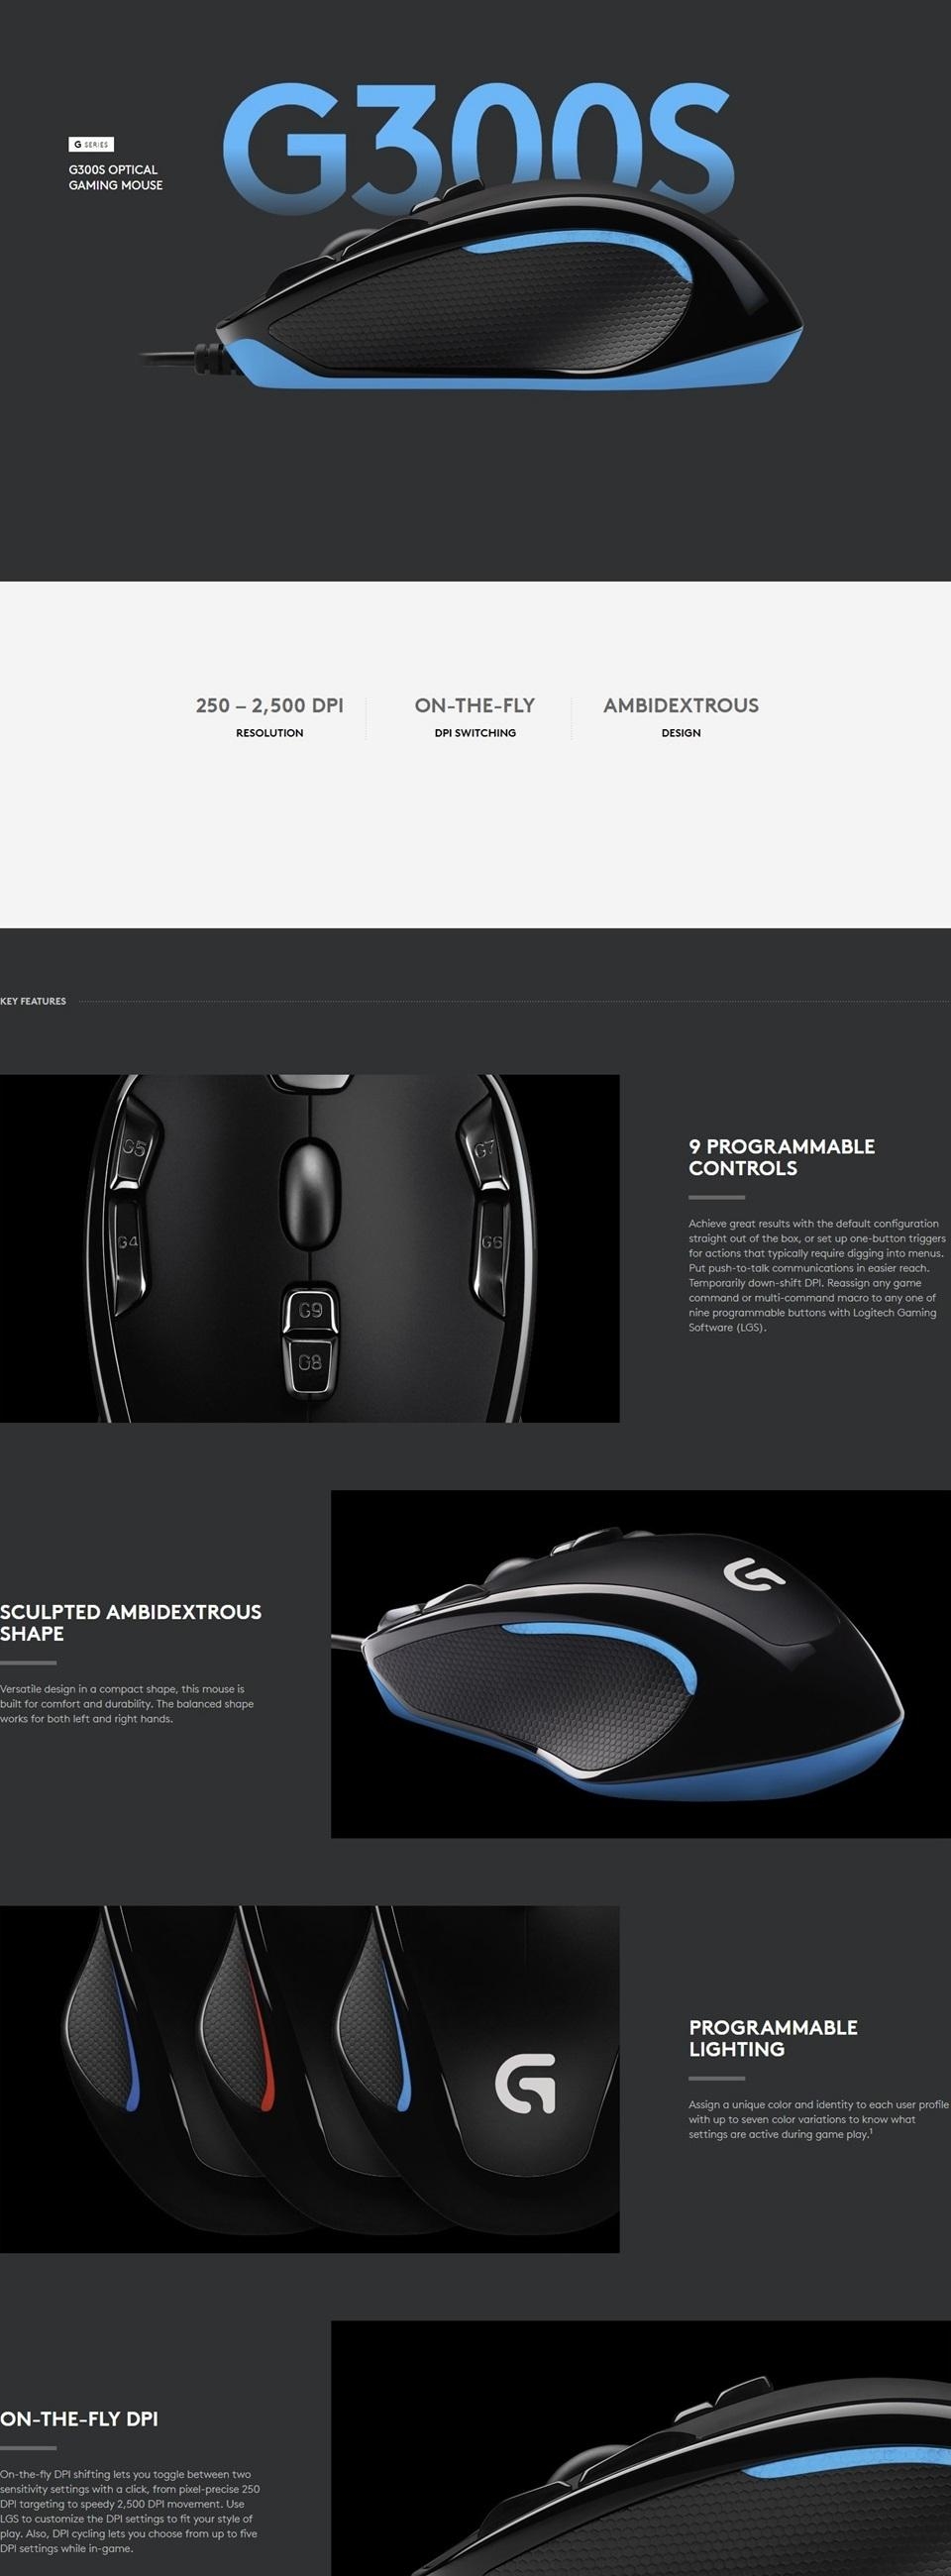 Logitech G300s Rgb Led Light Tunable Ergonomic Usb Optical Wired Gaming Mouse 910 Mouse Peripherals Pc Meal